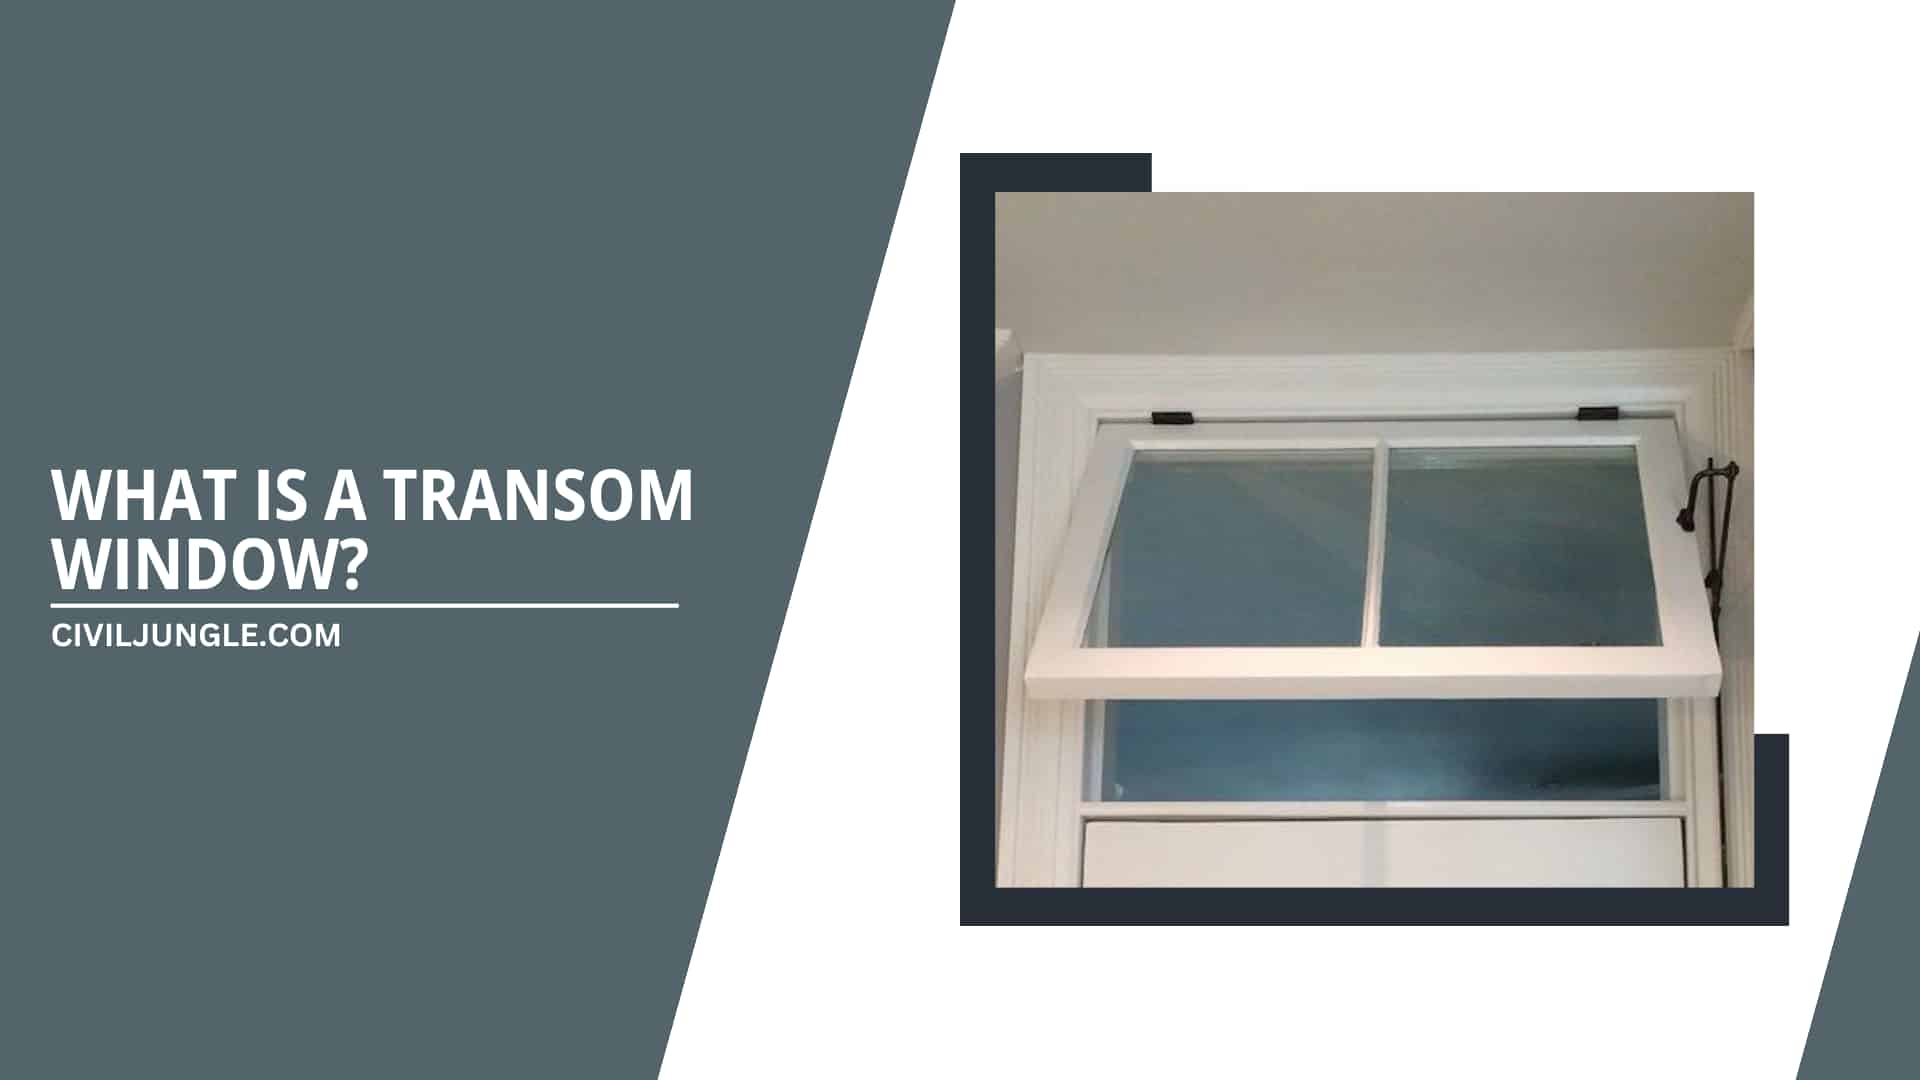 WHAT IS A TRANSOM WINDOW?